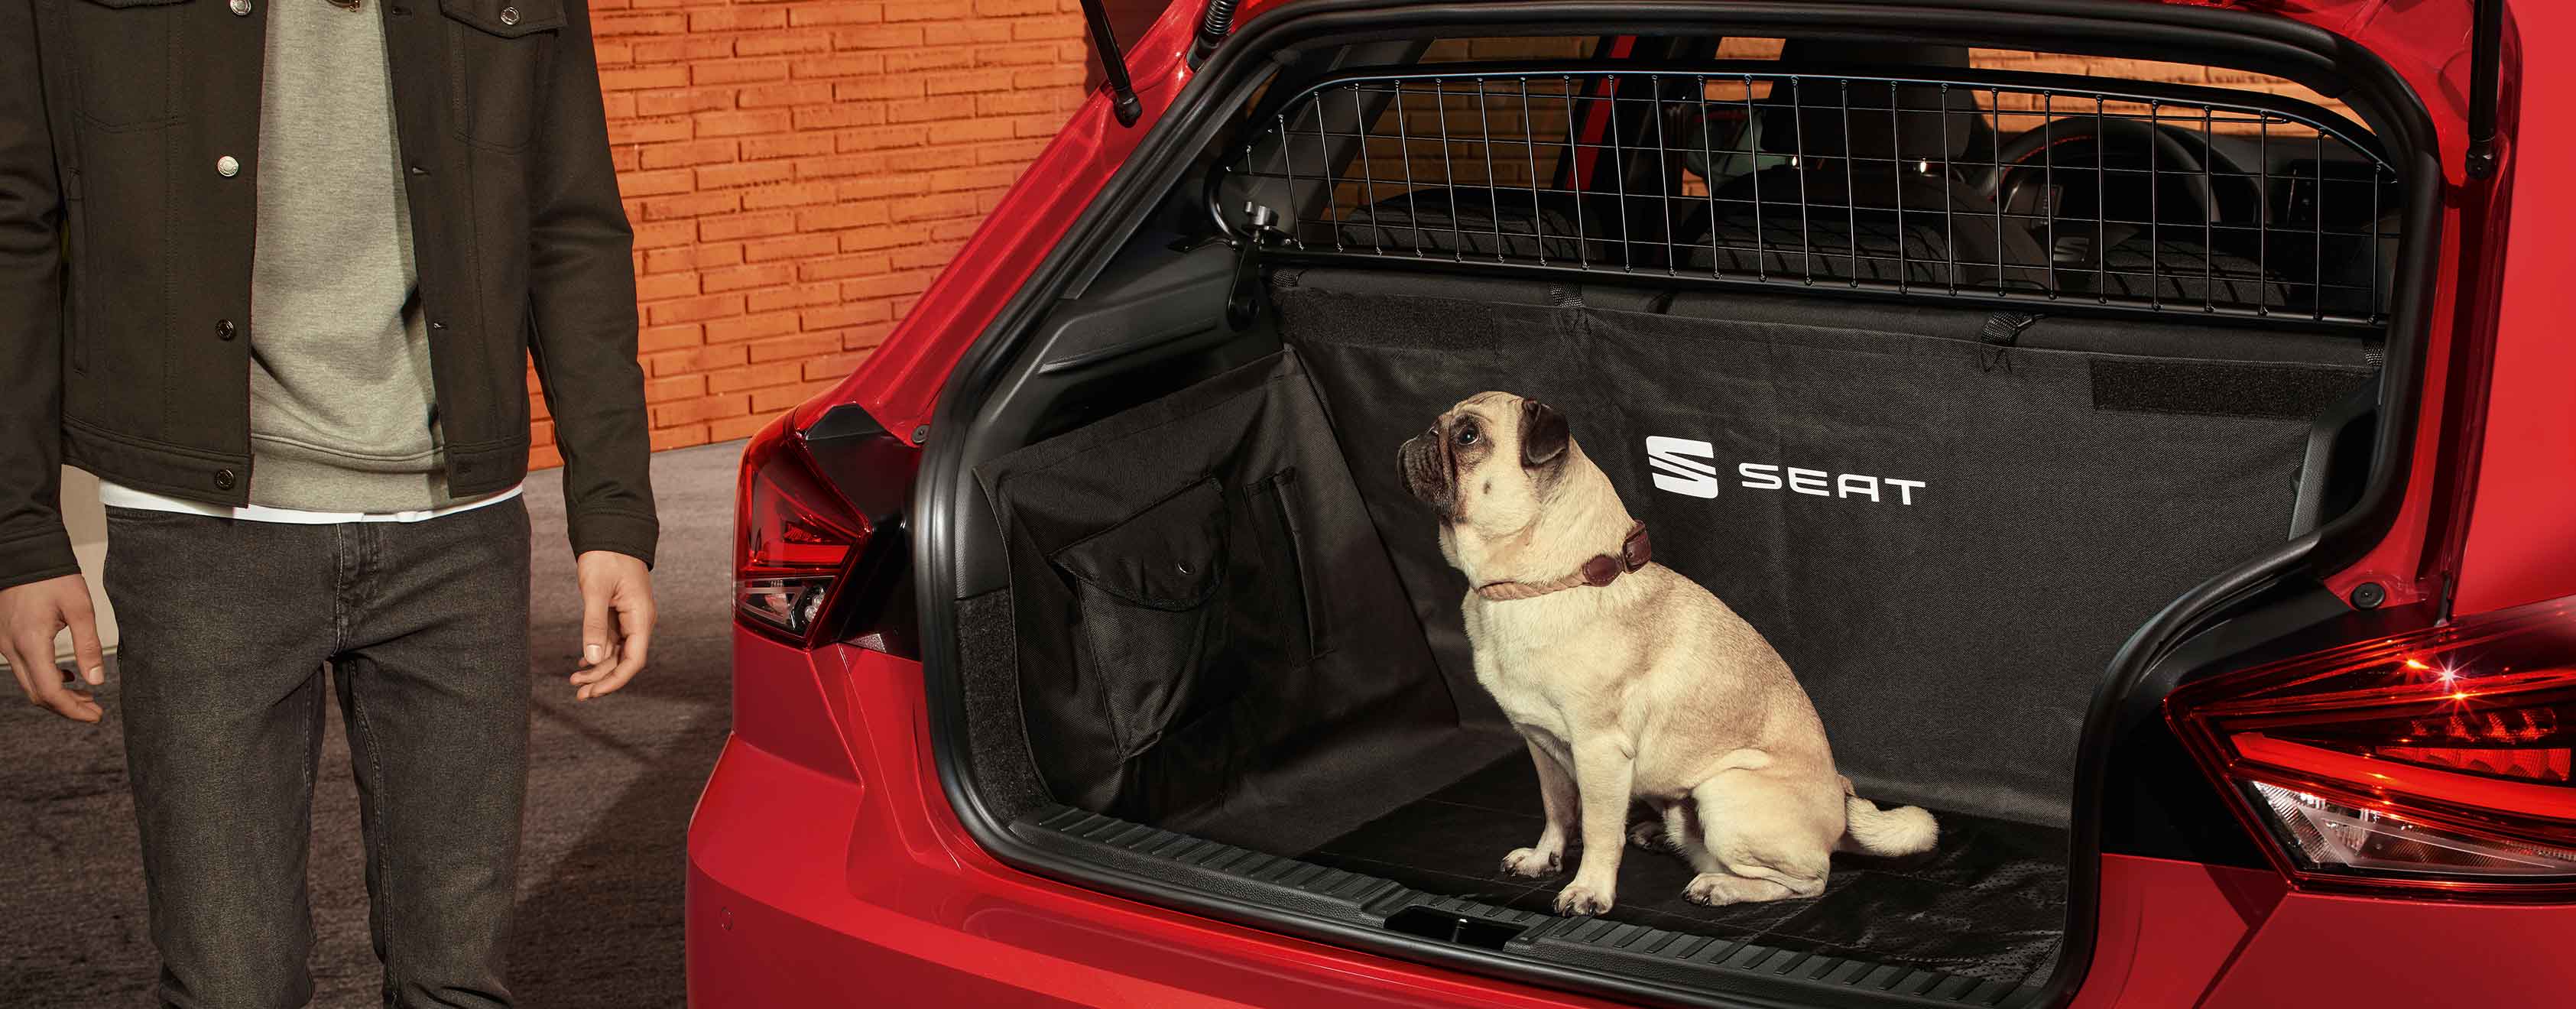 Dog sitting in SEAT Ibiza boot with separation grille